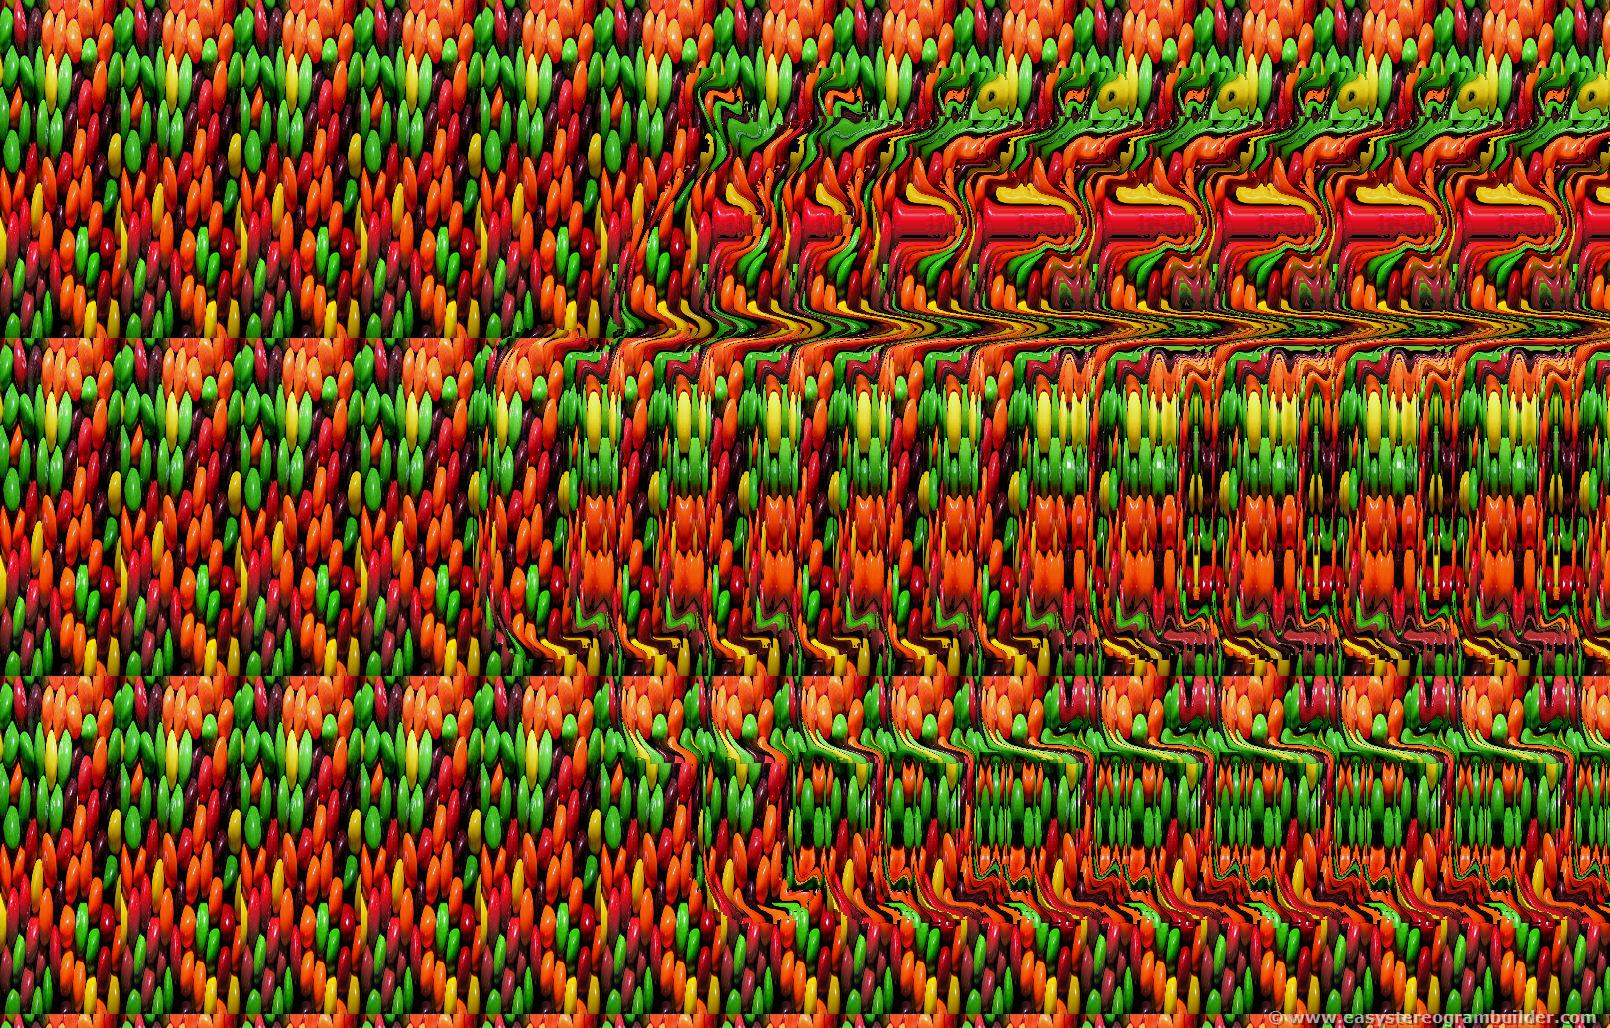 3D Stereogram Images   Widescreen HD Wallpapers 1610x1028